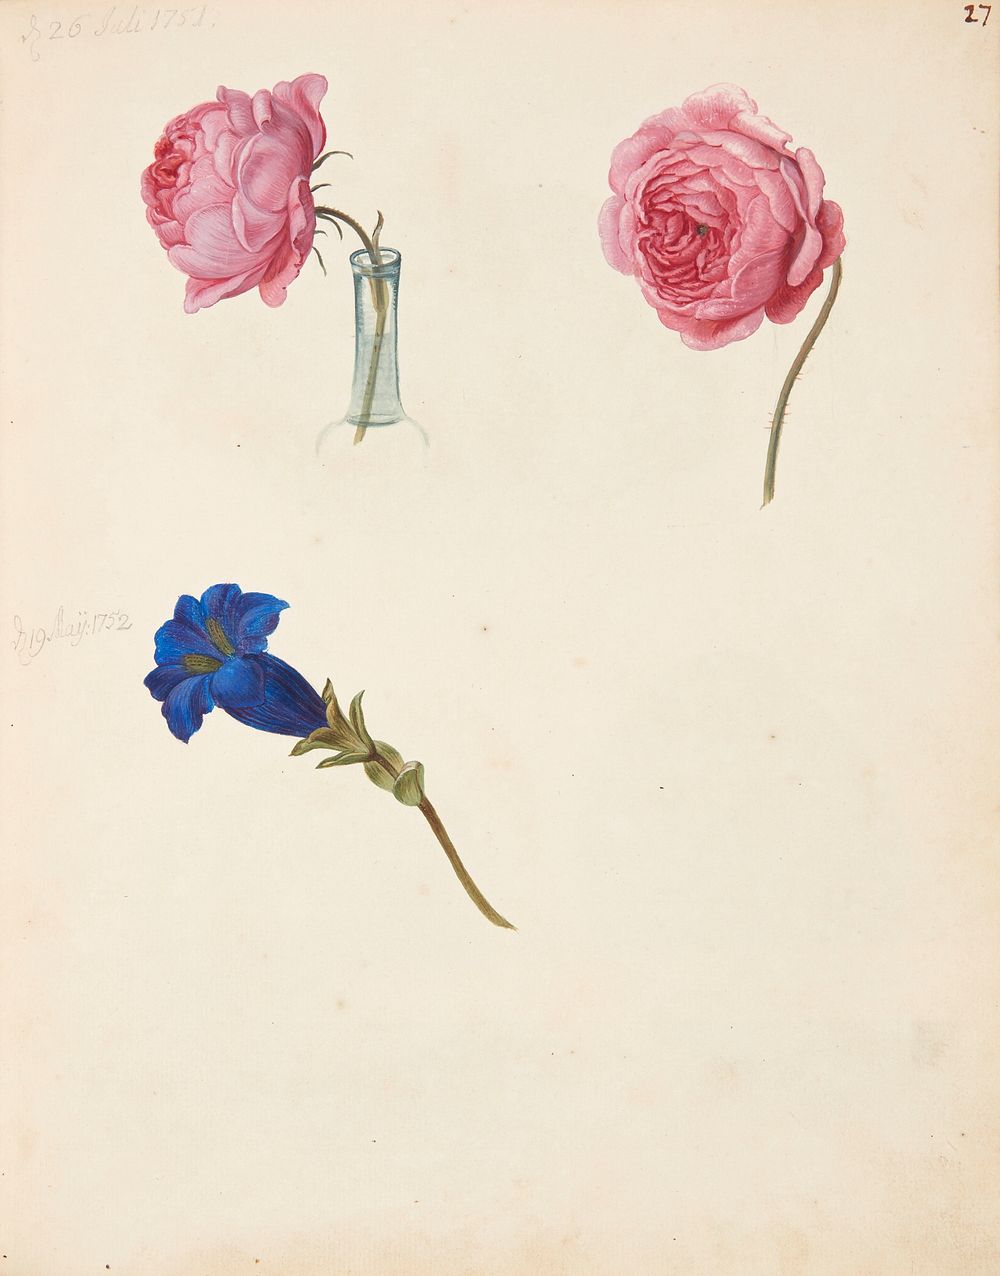 Study of pink rose and blue flower by Johanna Fosie